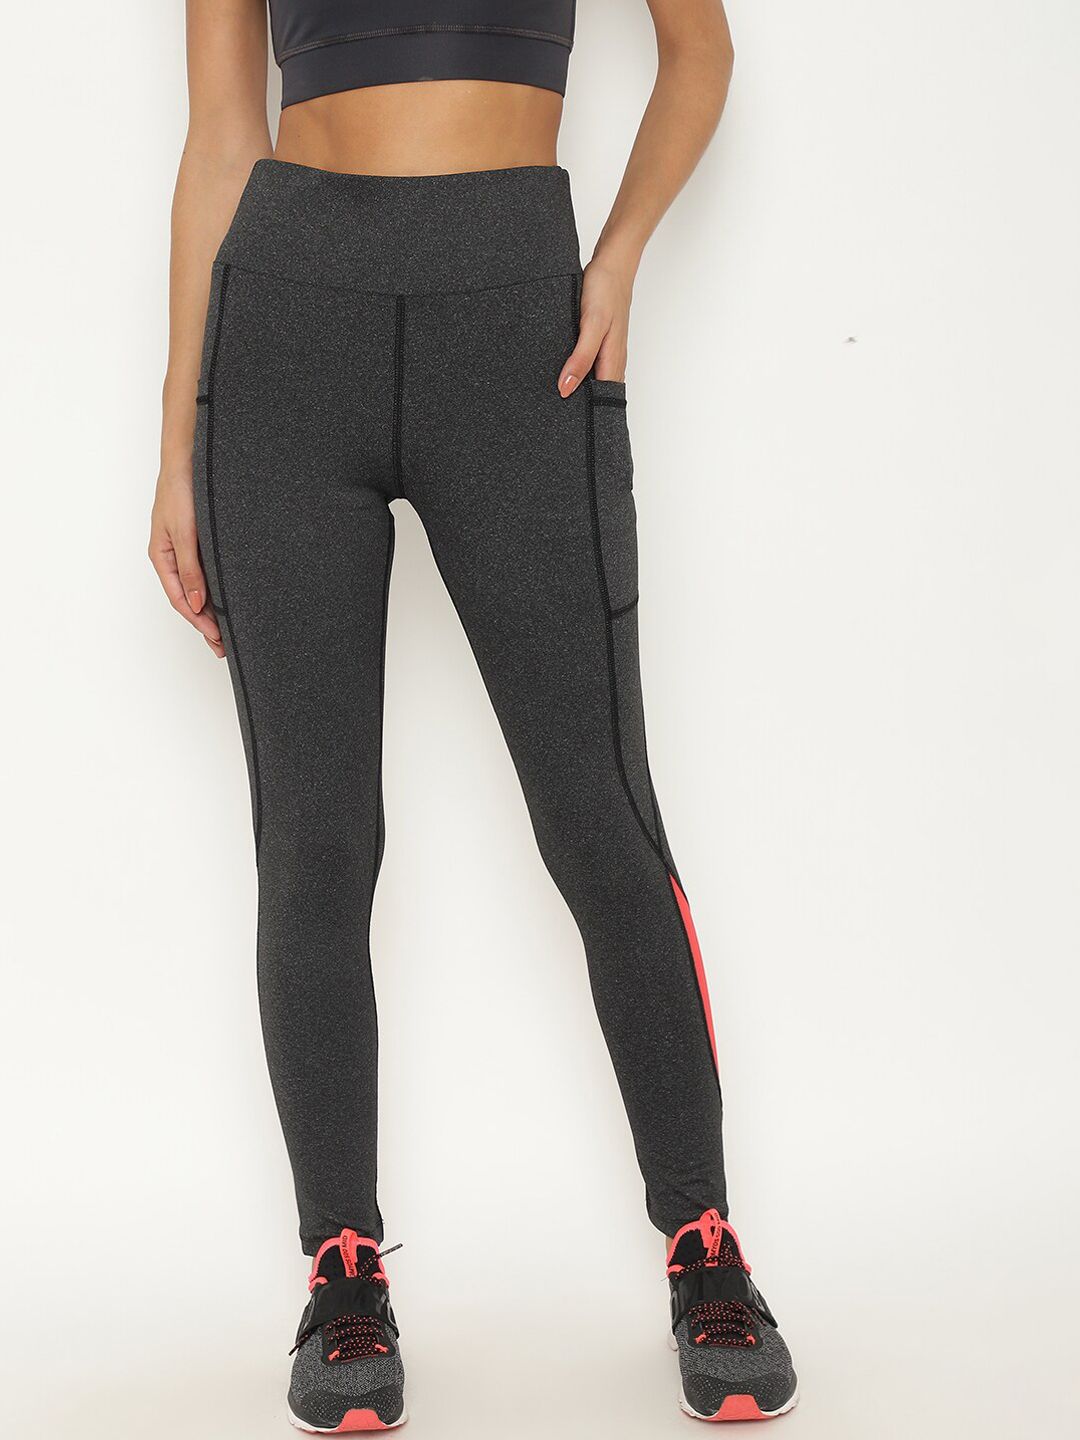 Chkokko Women Grey & Red Yoga Stretchable Gym Tights Price in India